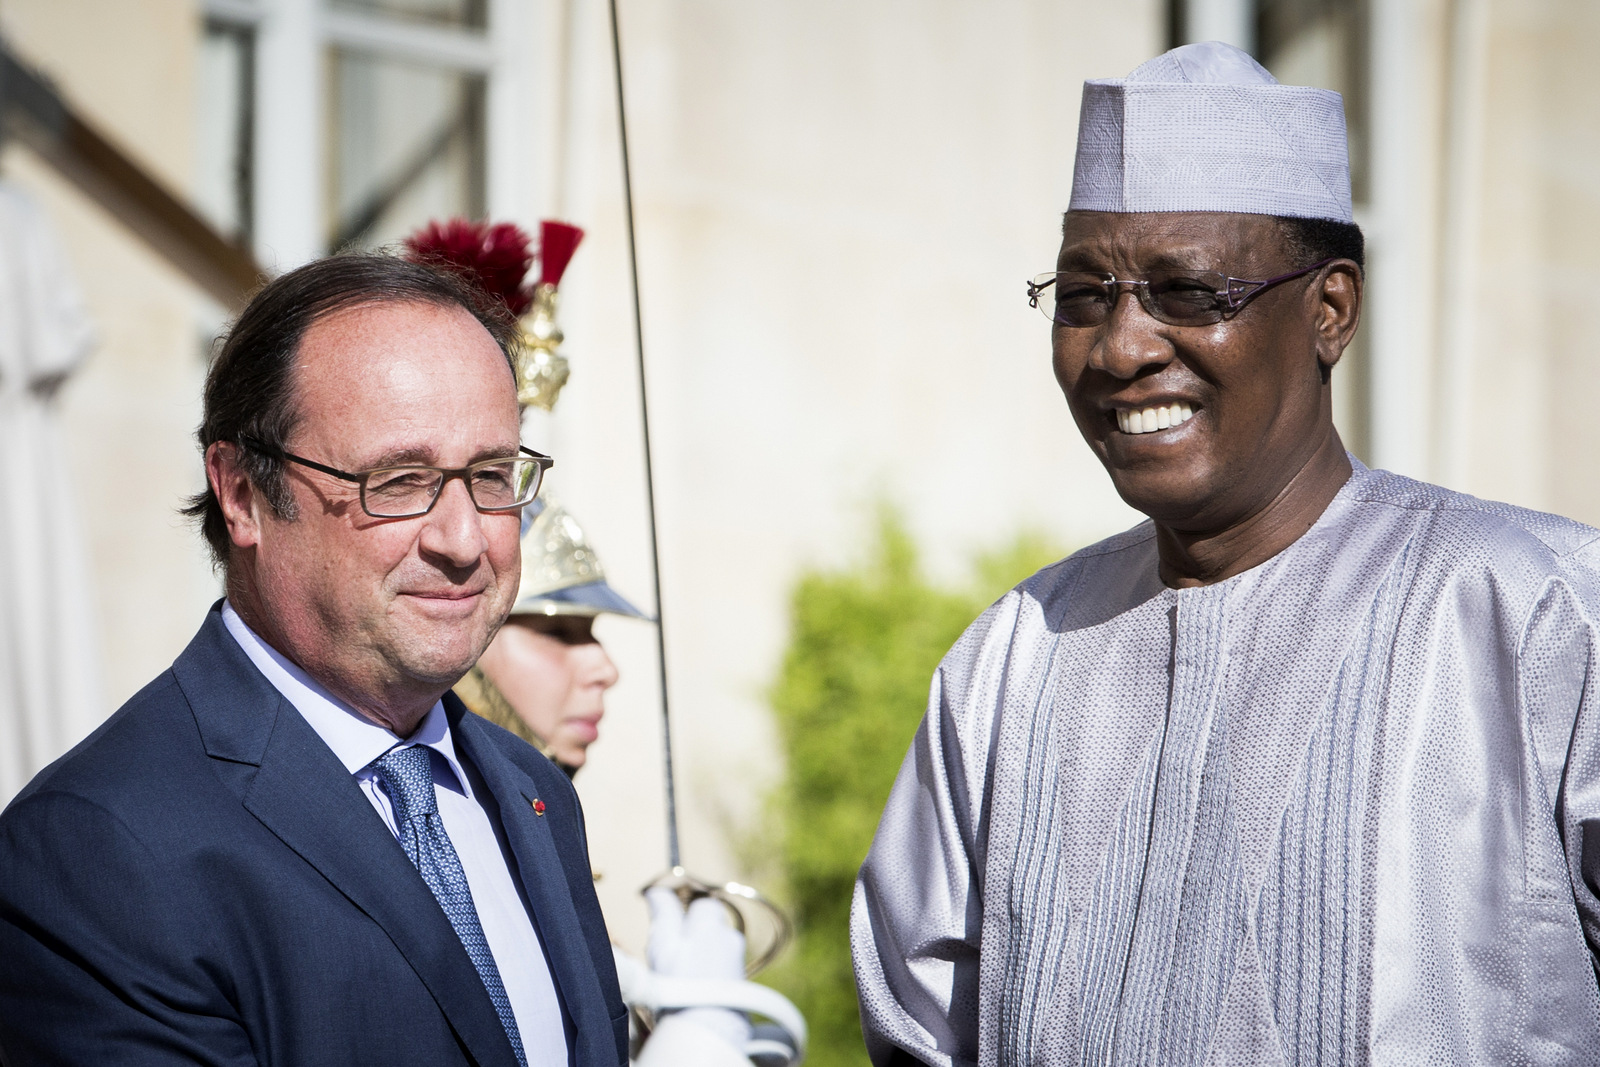 French President Francois Hollande, left, welcomes Chad President Idriss Deby Itno, prior to a meeting at the Elysee Palace in Paris, Saturday, Aug. 20, 2016. (AP/Kamil Zihnioglu)